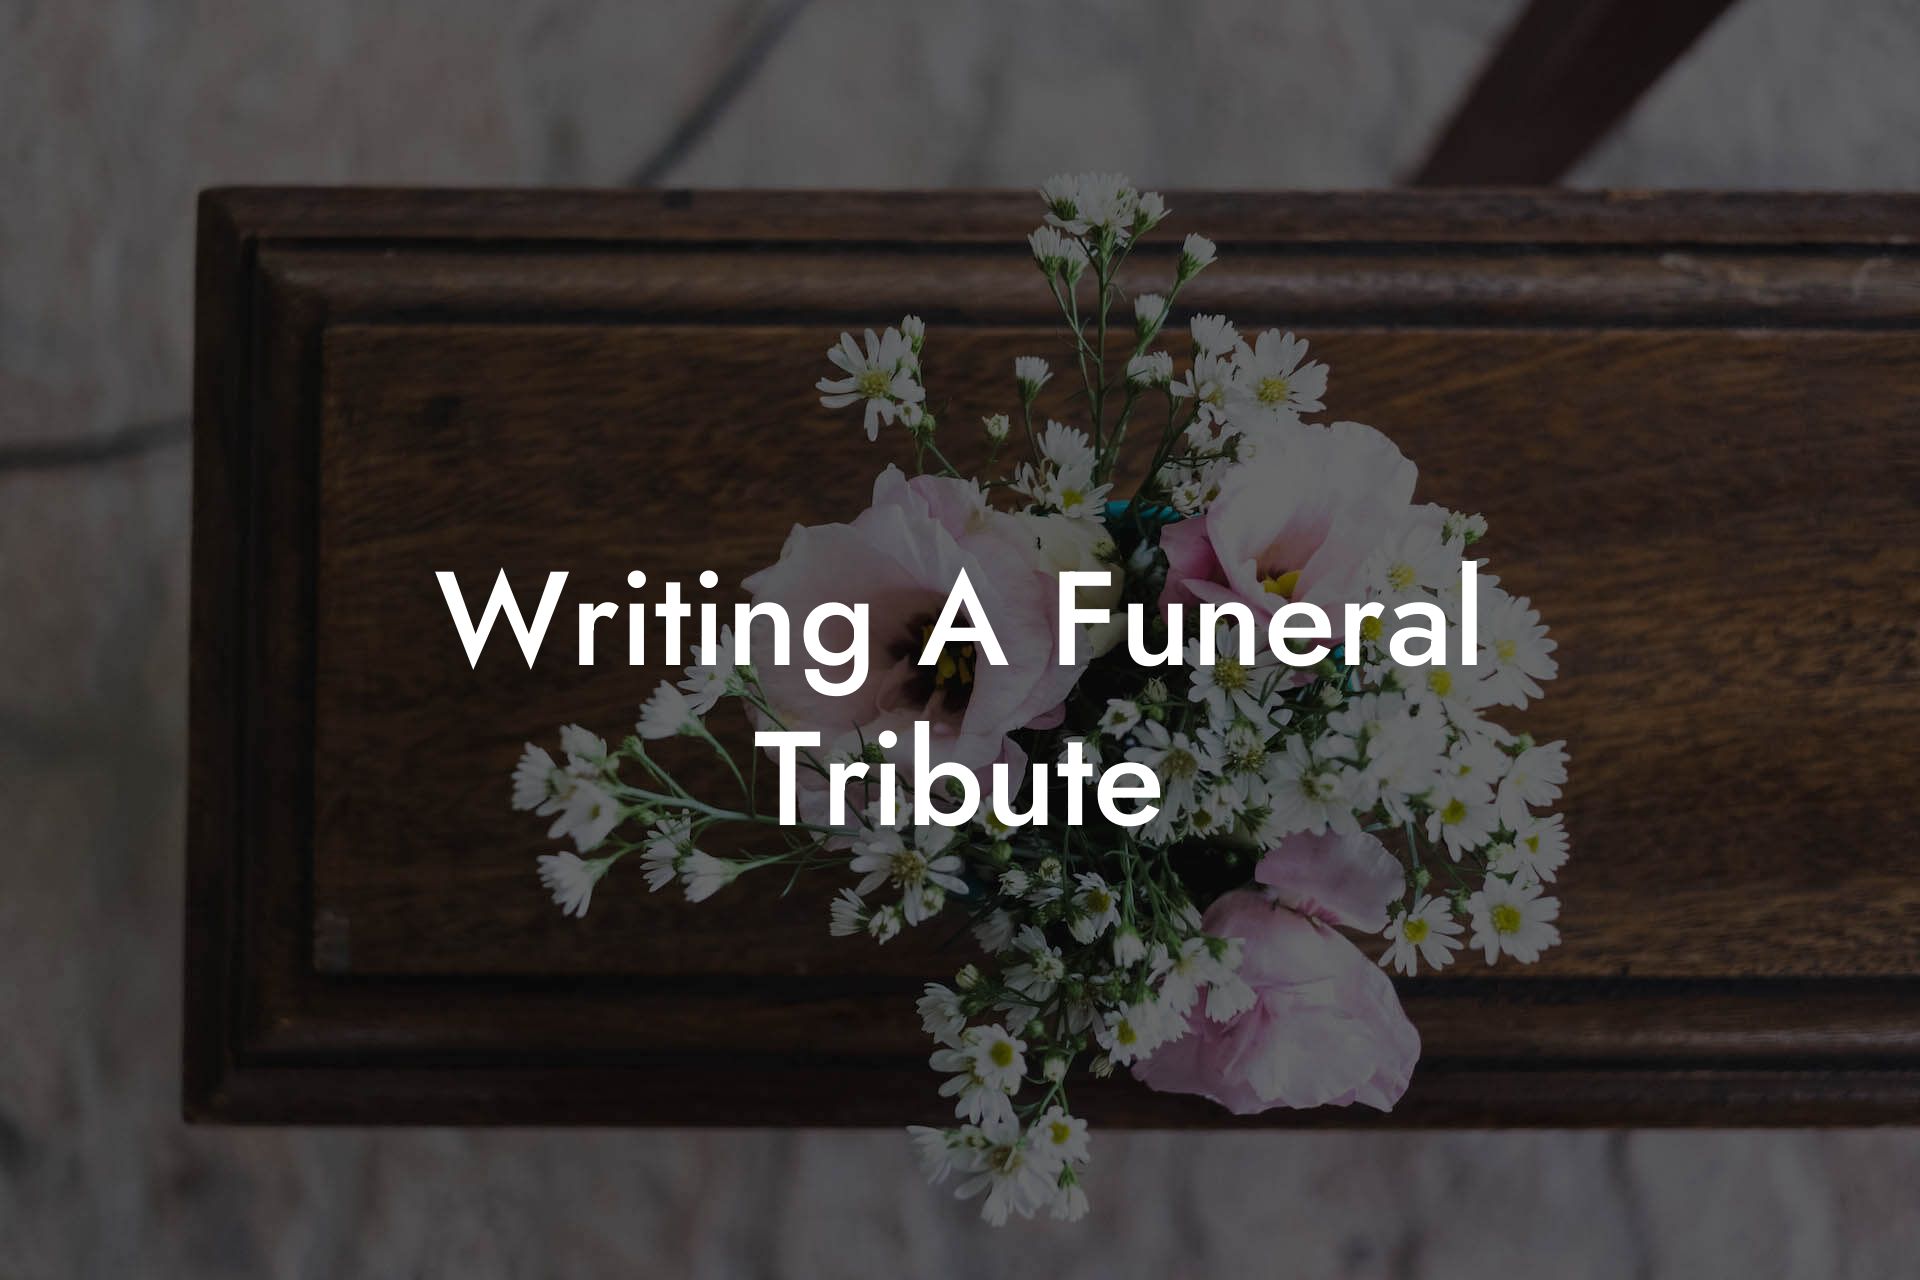 Writing A Funeral Tribute